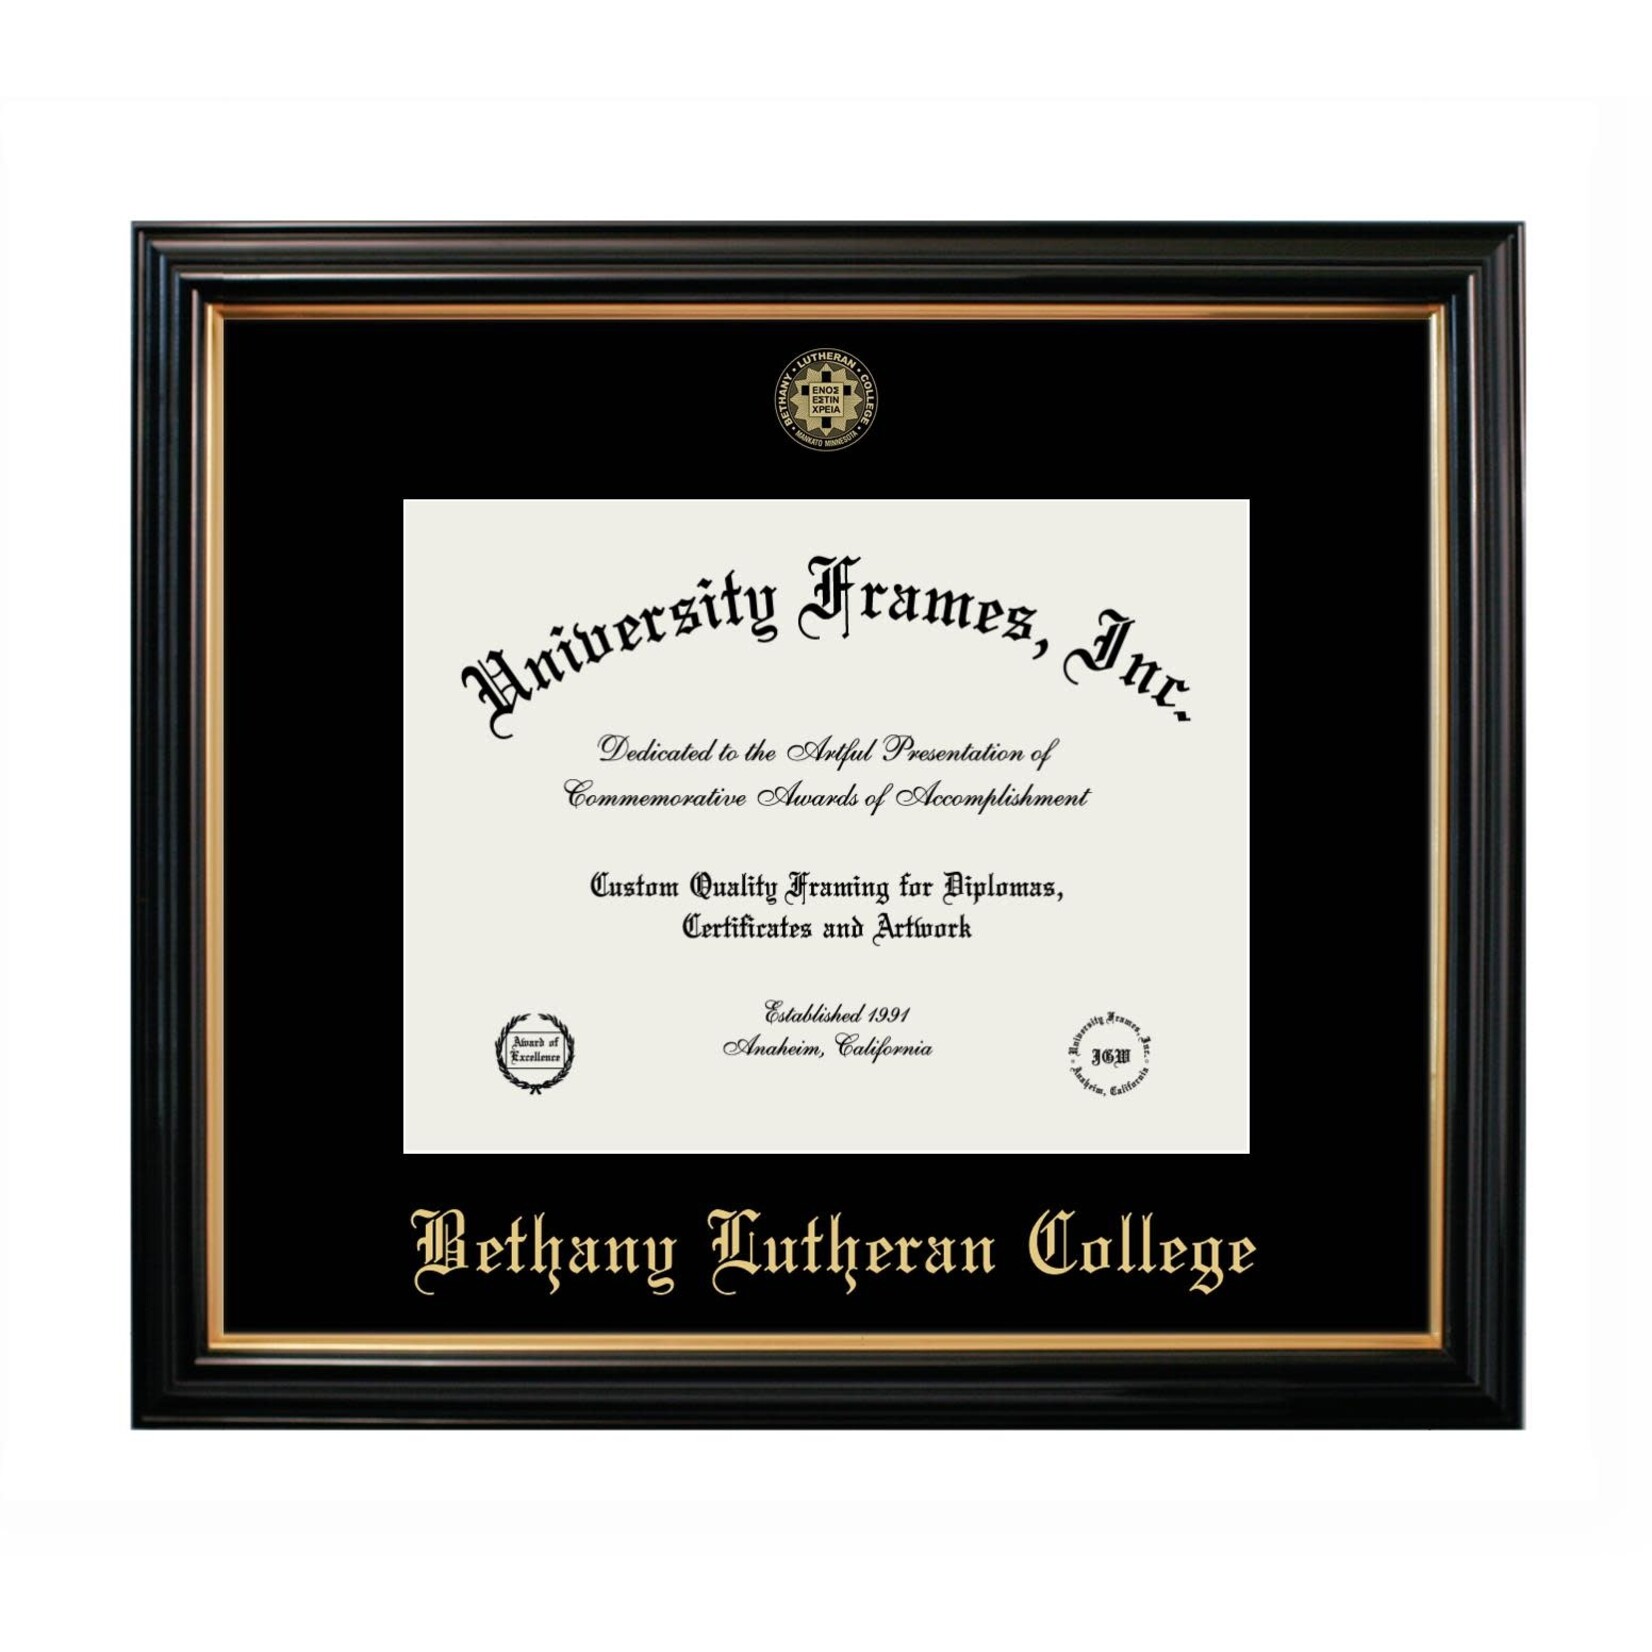 Bethany Lutheran College Diploma Frame - Petite